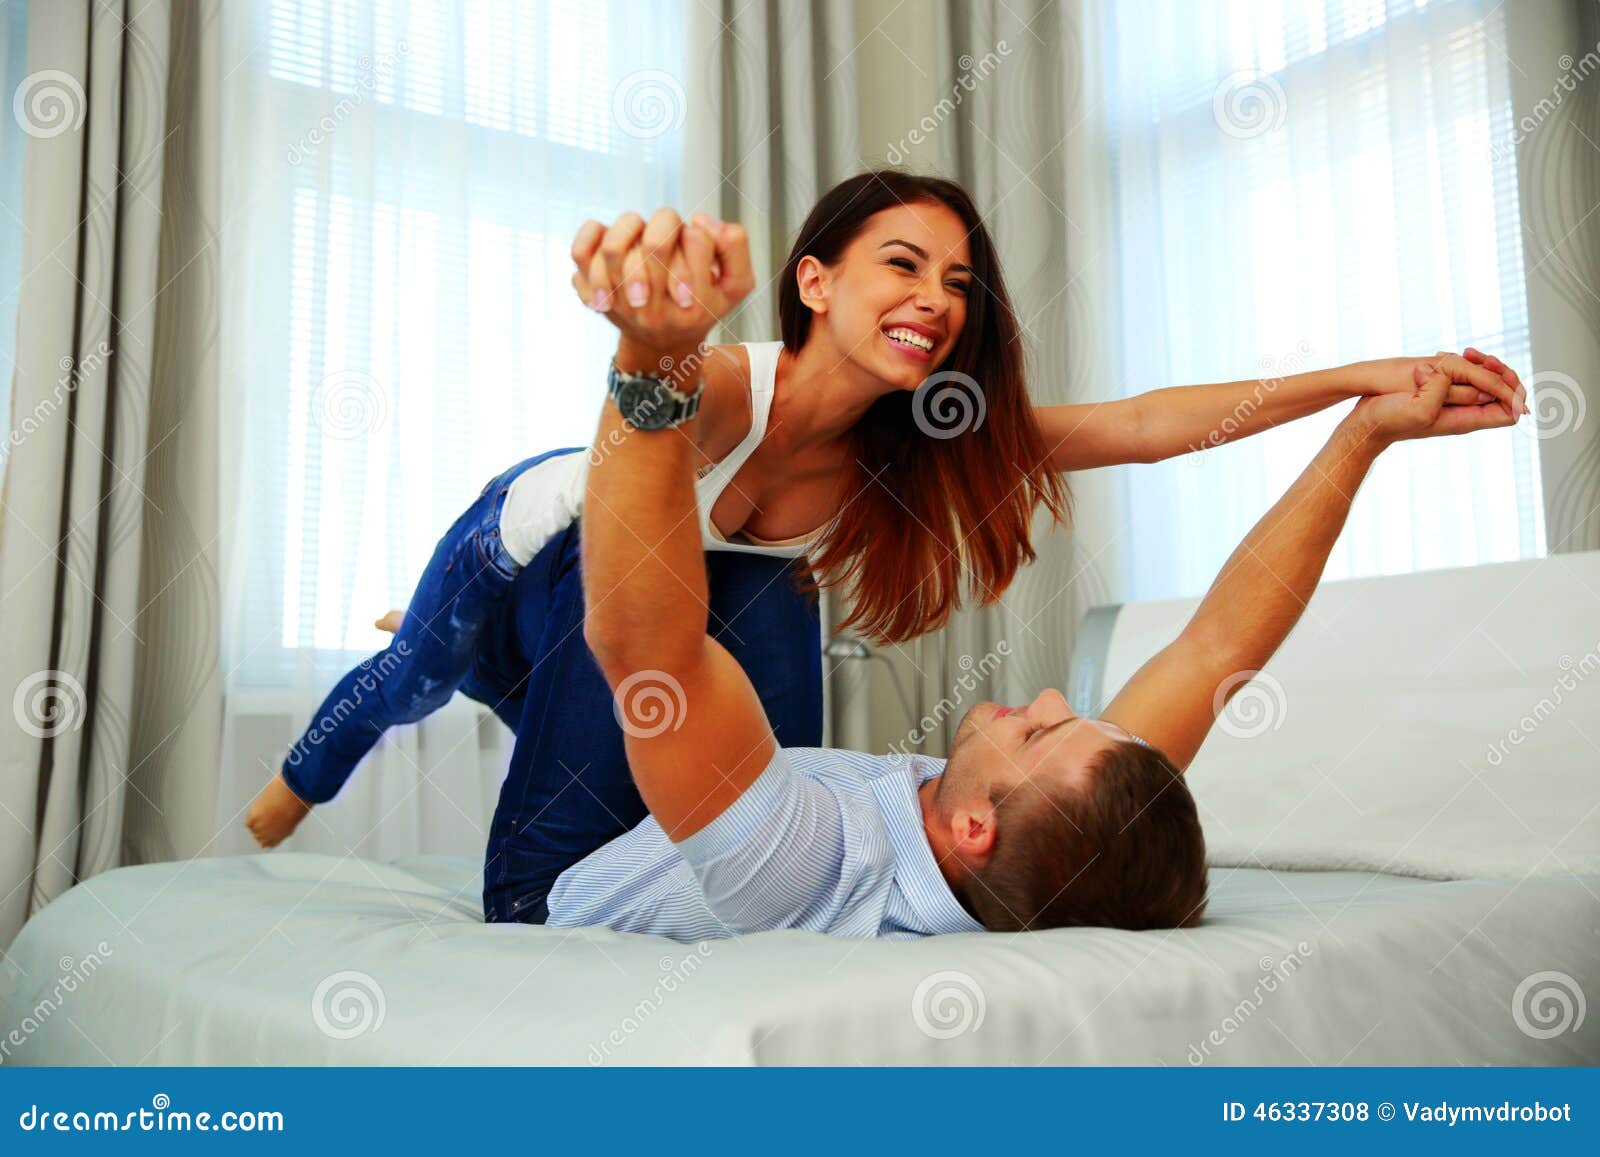 couple playing in bed